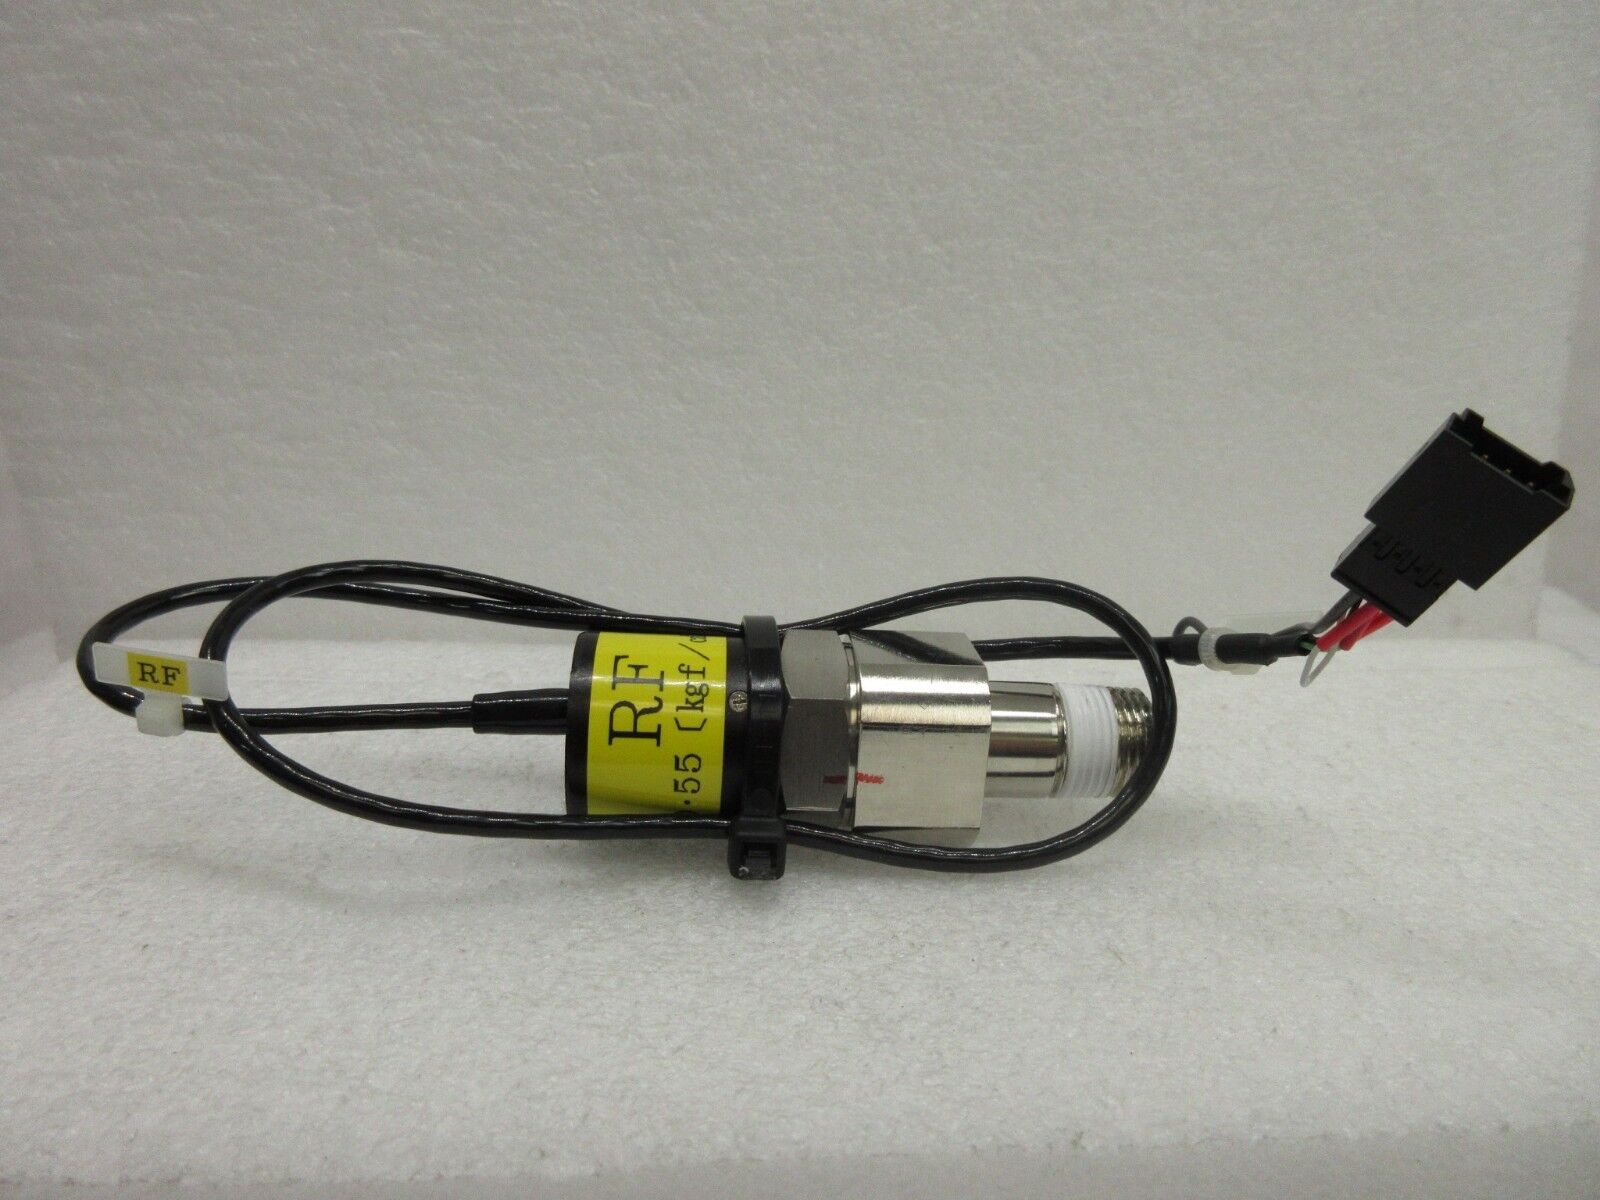 Copal PS8-102G Pressure Switch OM5 Nikon NSR-S204B Step-and-Repeat Used Working